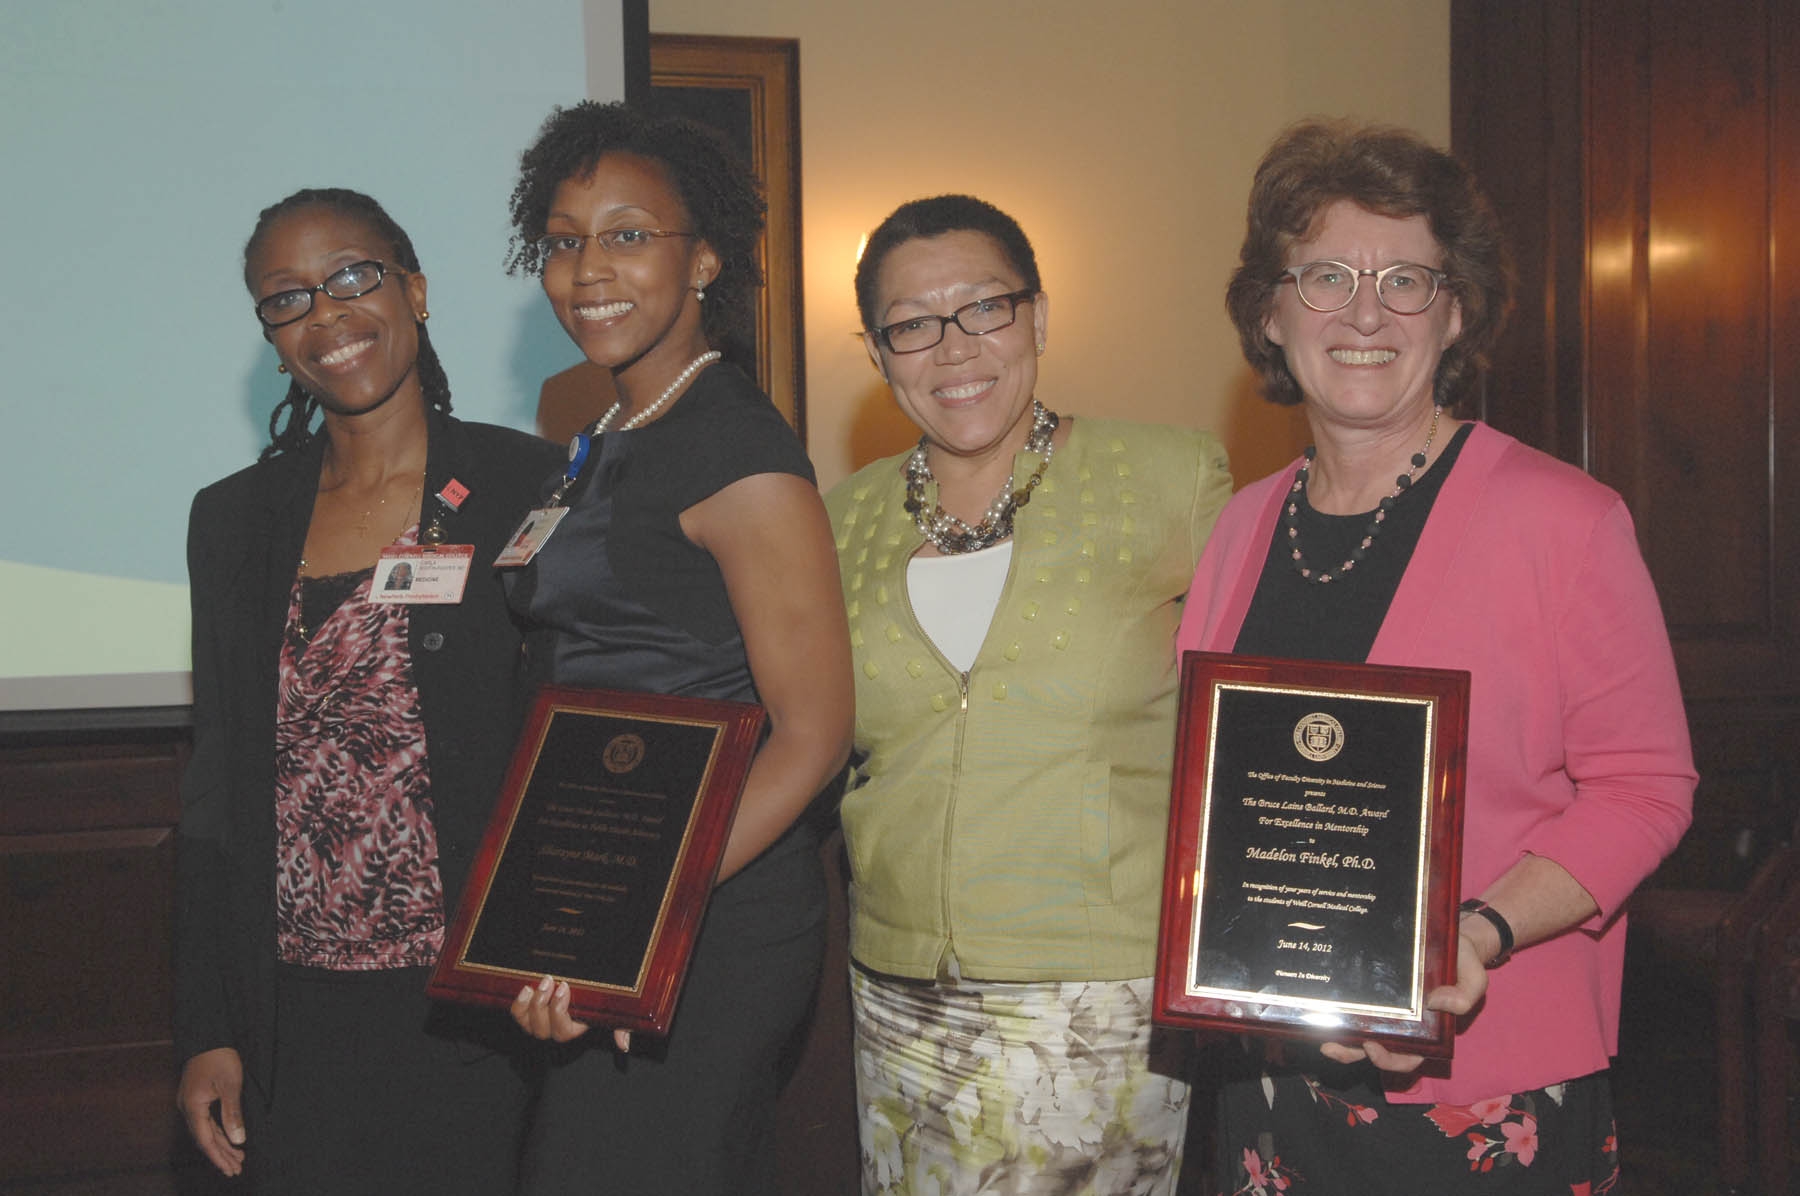 Drs. Carla Boutin-Foster, Sharayne Mark, Anne C. Beal and Madelon Finkel: Pioneers In Diversity Award ceremony 